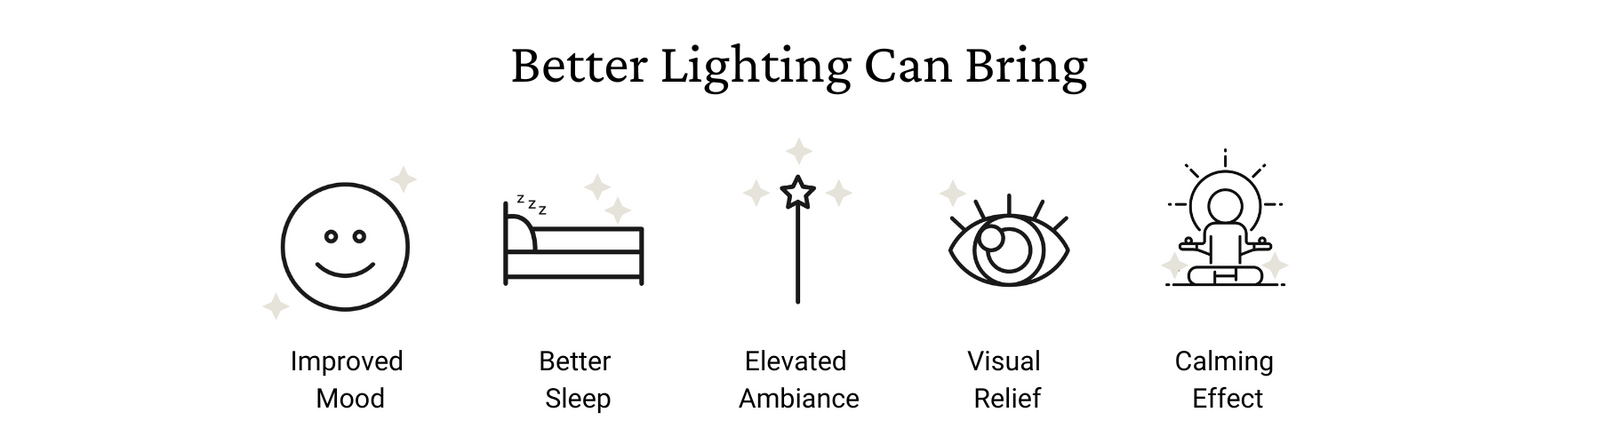 Product marketing image depicting different icons for how better lighting can improve your life